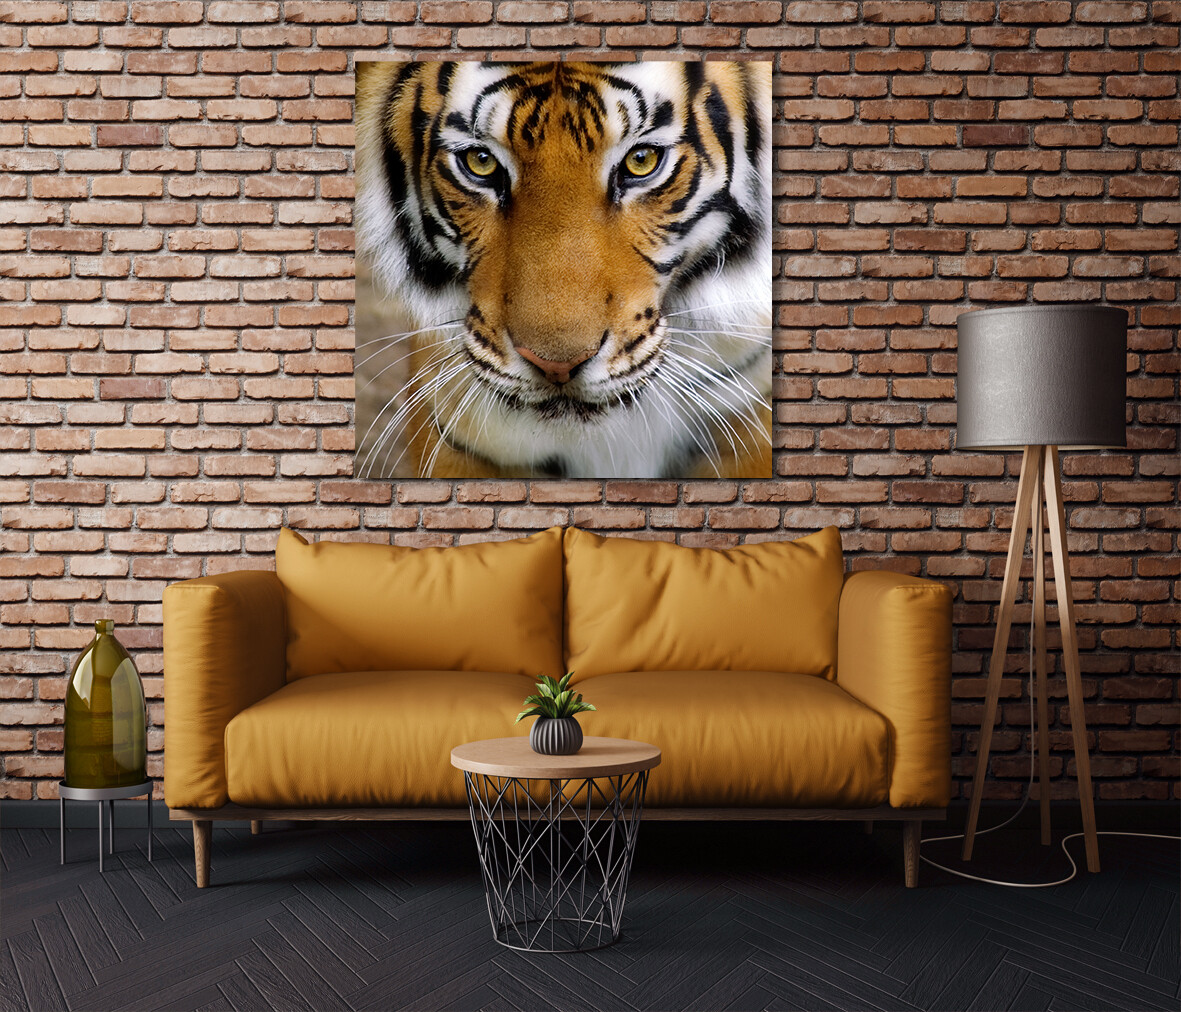 The Tiger - Modern Luxury Wall art Printed on Acrylic Glass - Frameless and Ready to Hang